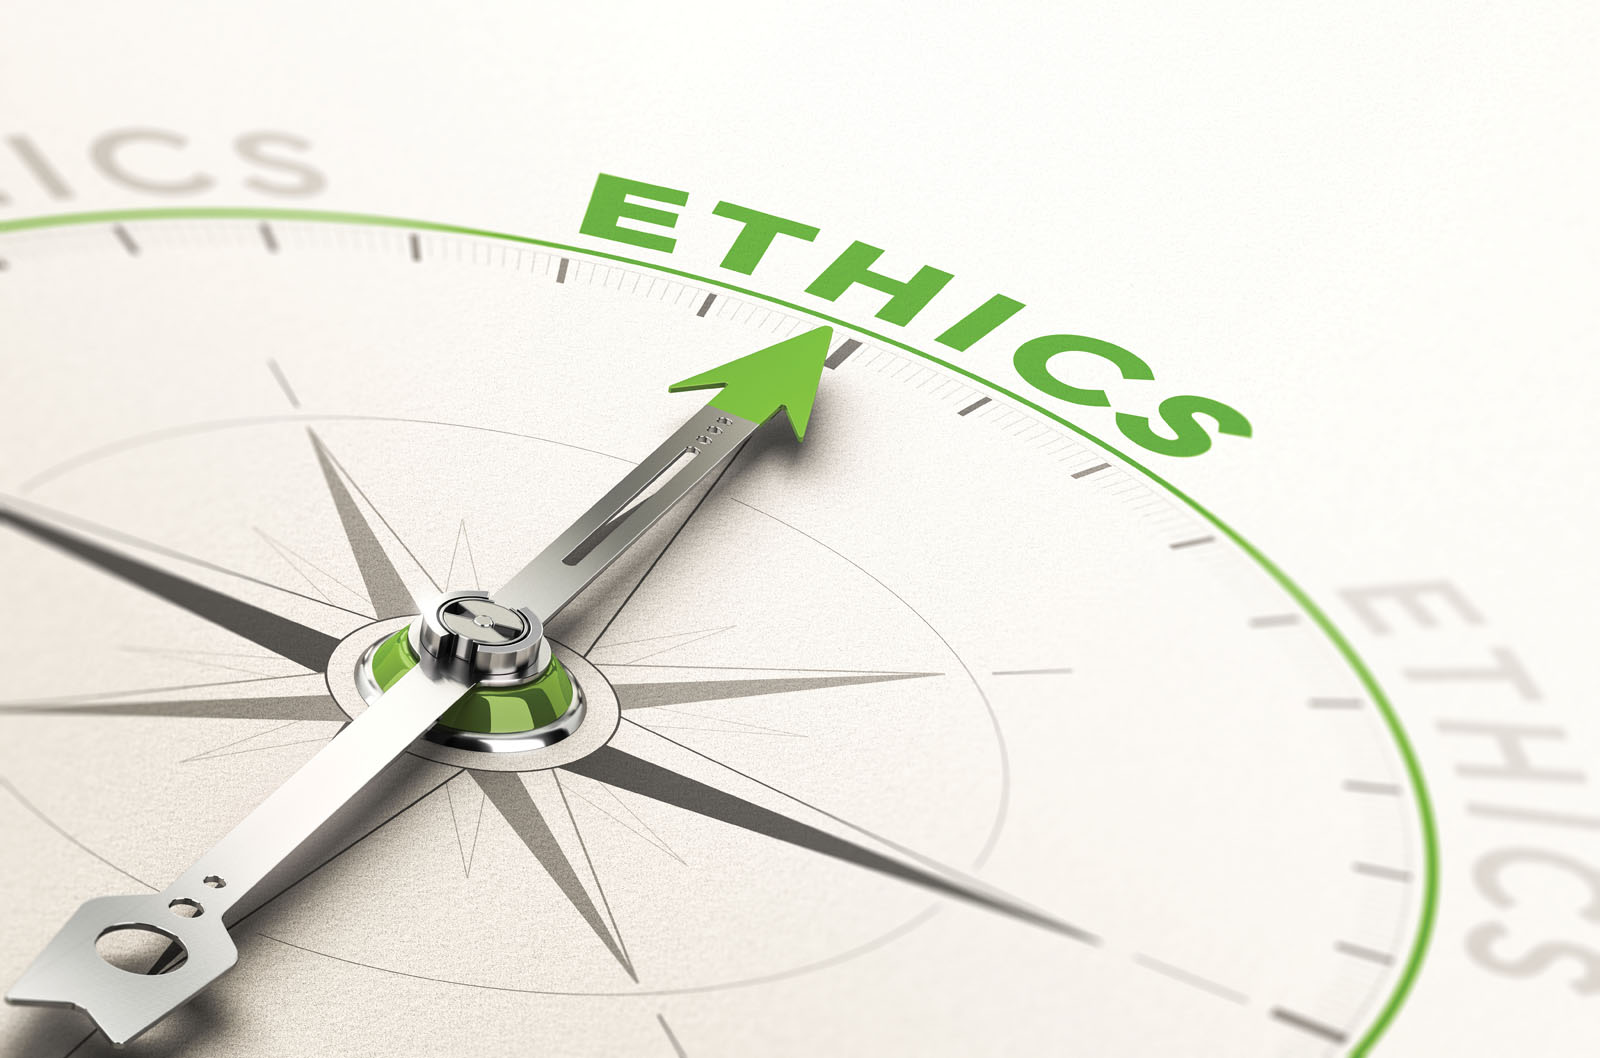 Ethical Leadership: A Moral Compass for Decision-Makers - The